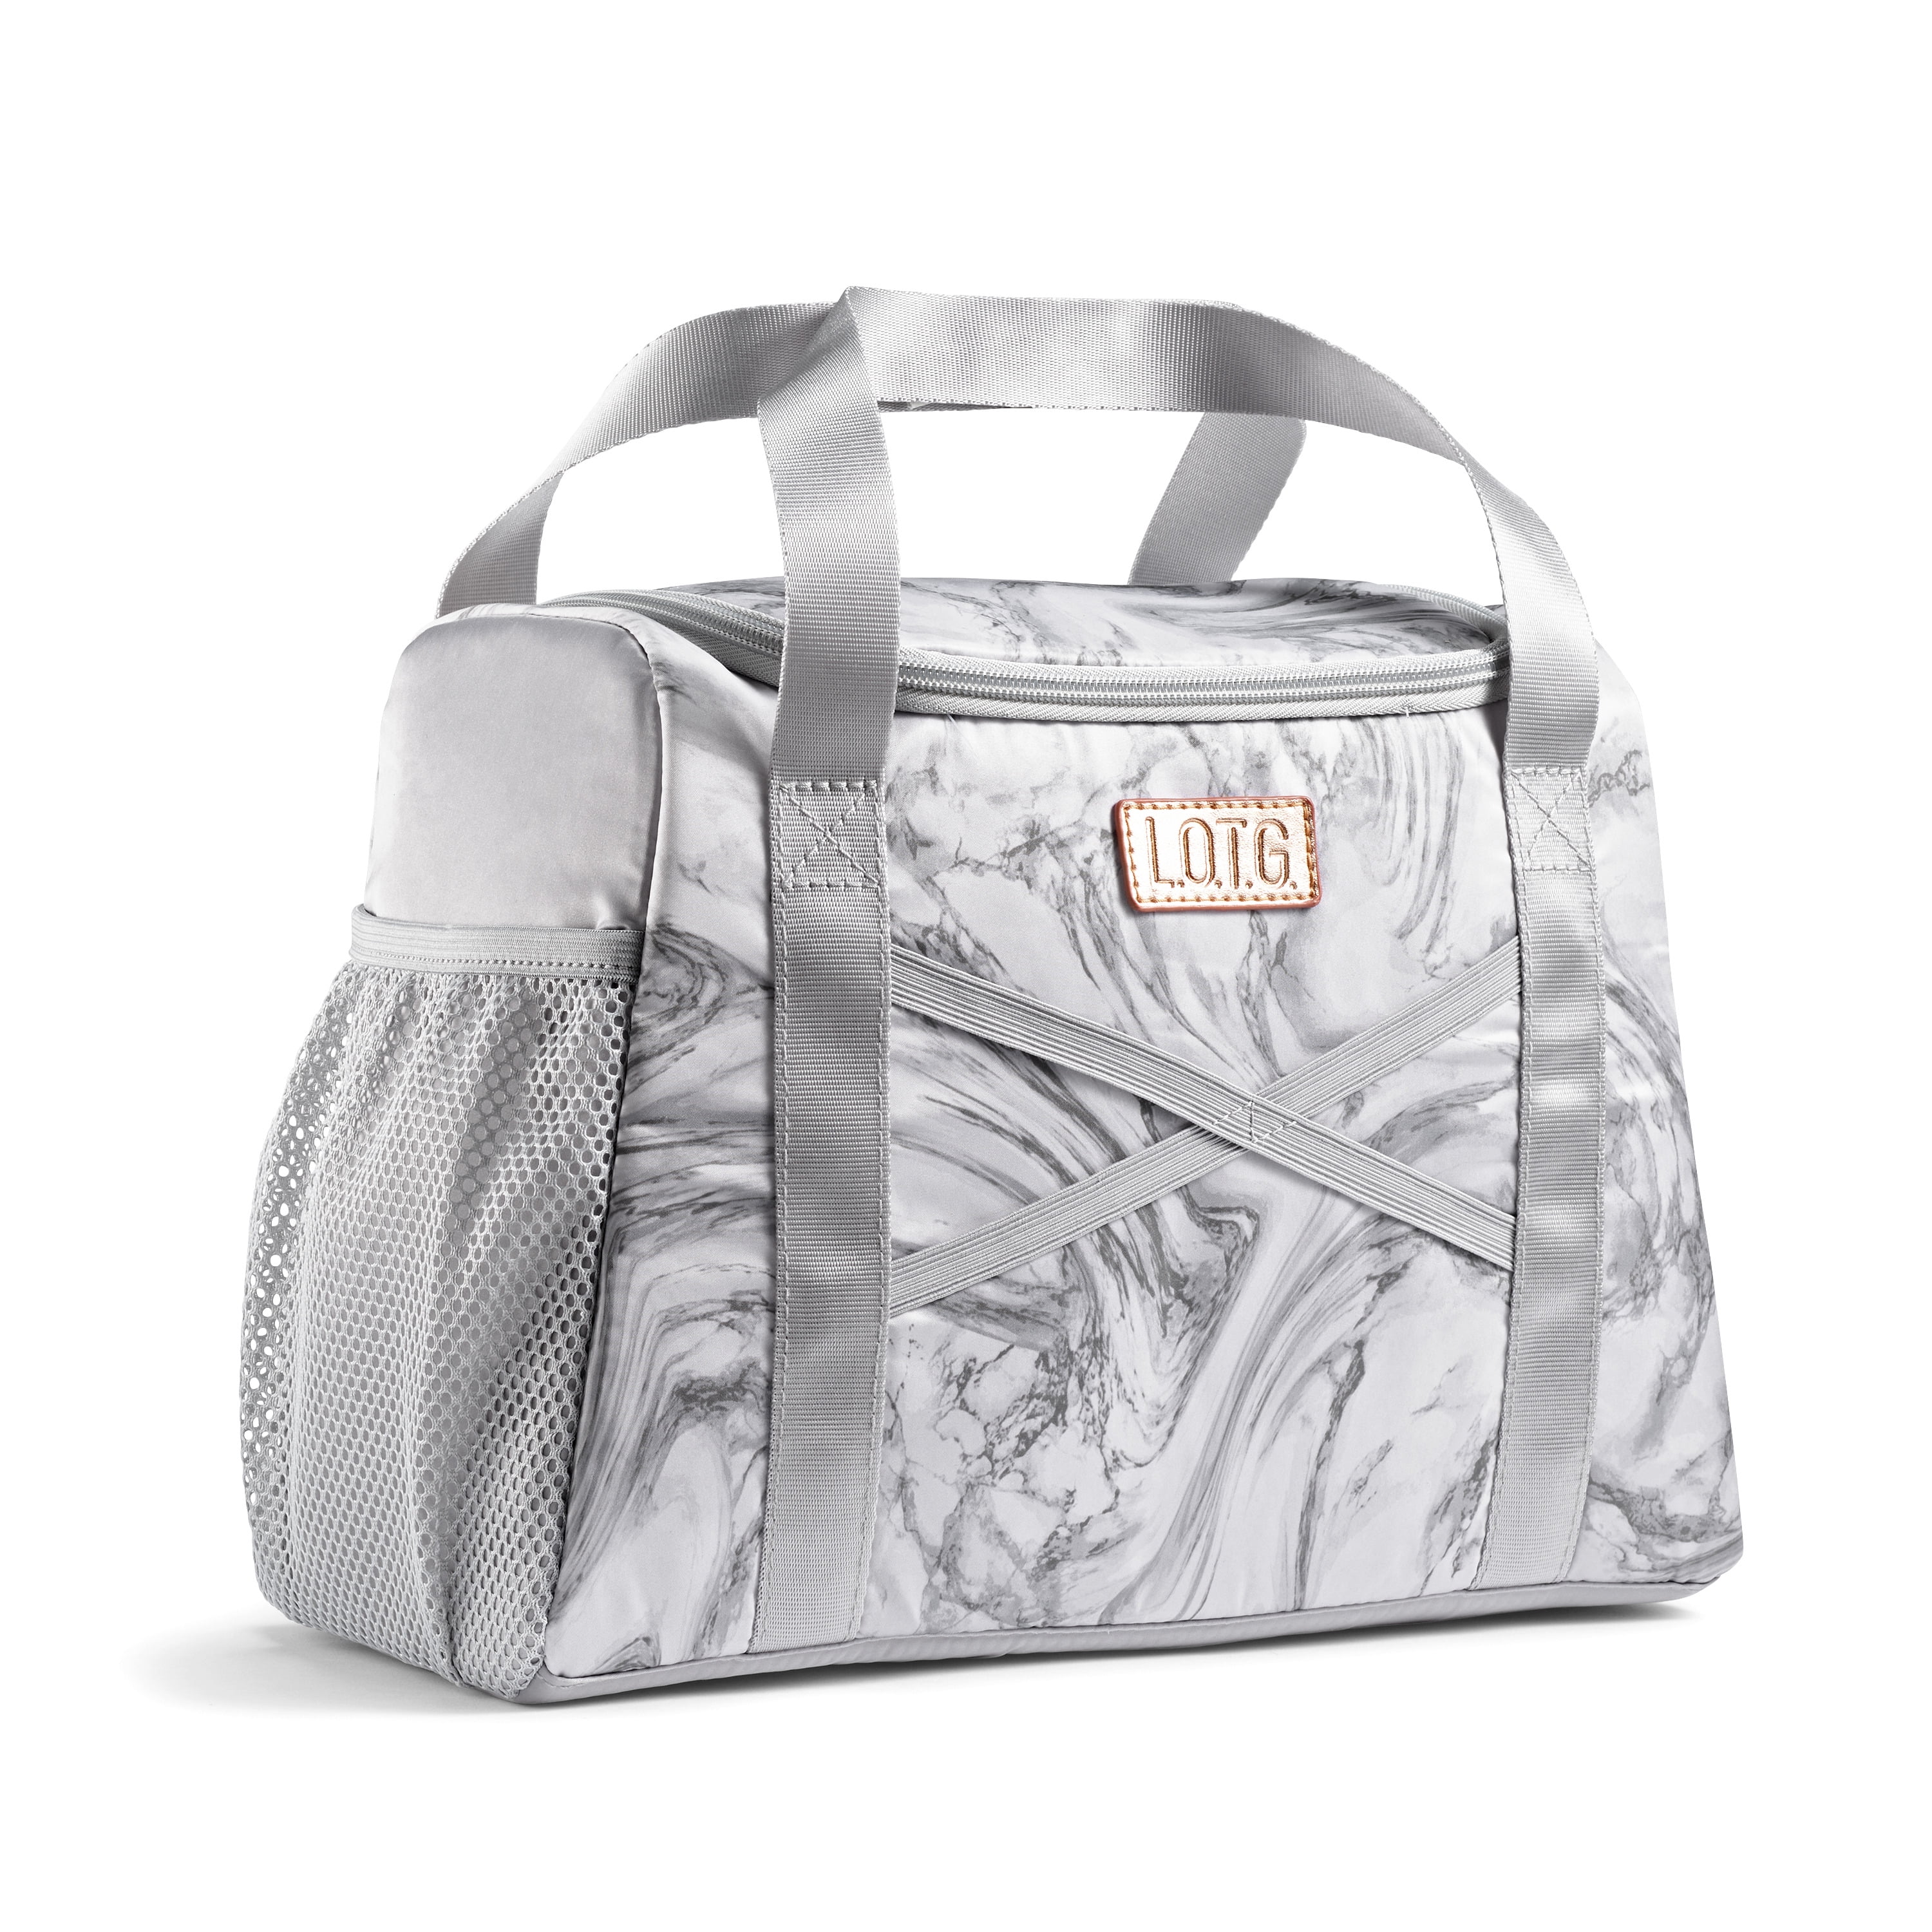  Marble Texture Insulated Lunch Bag for Kids, White Gray Marble  Lunch Box Reusable Cooler Lunch Tote Bag with Shoulder Strap for School  Travel Picnic: Home & Kitchen